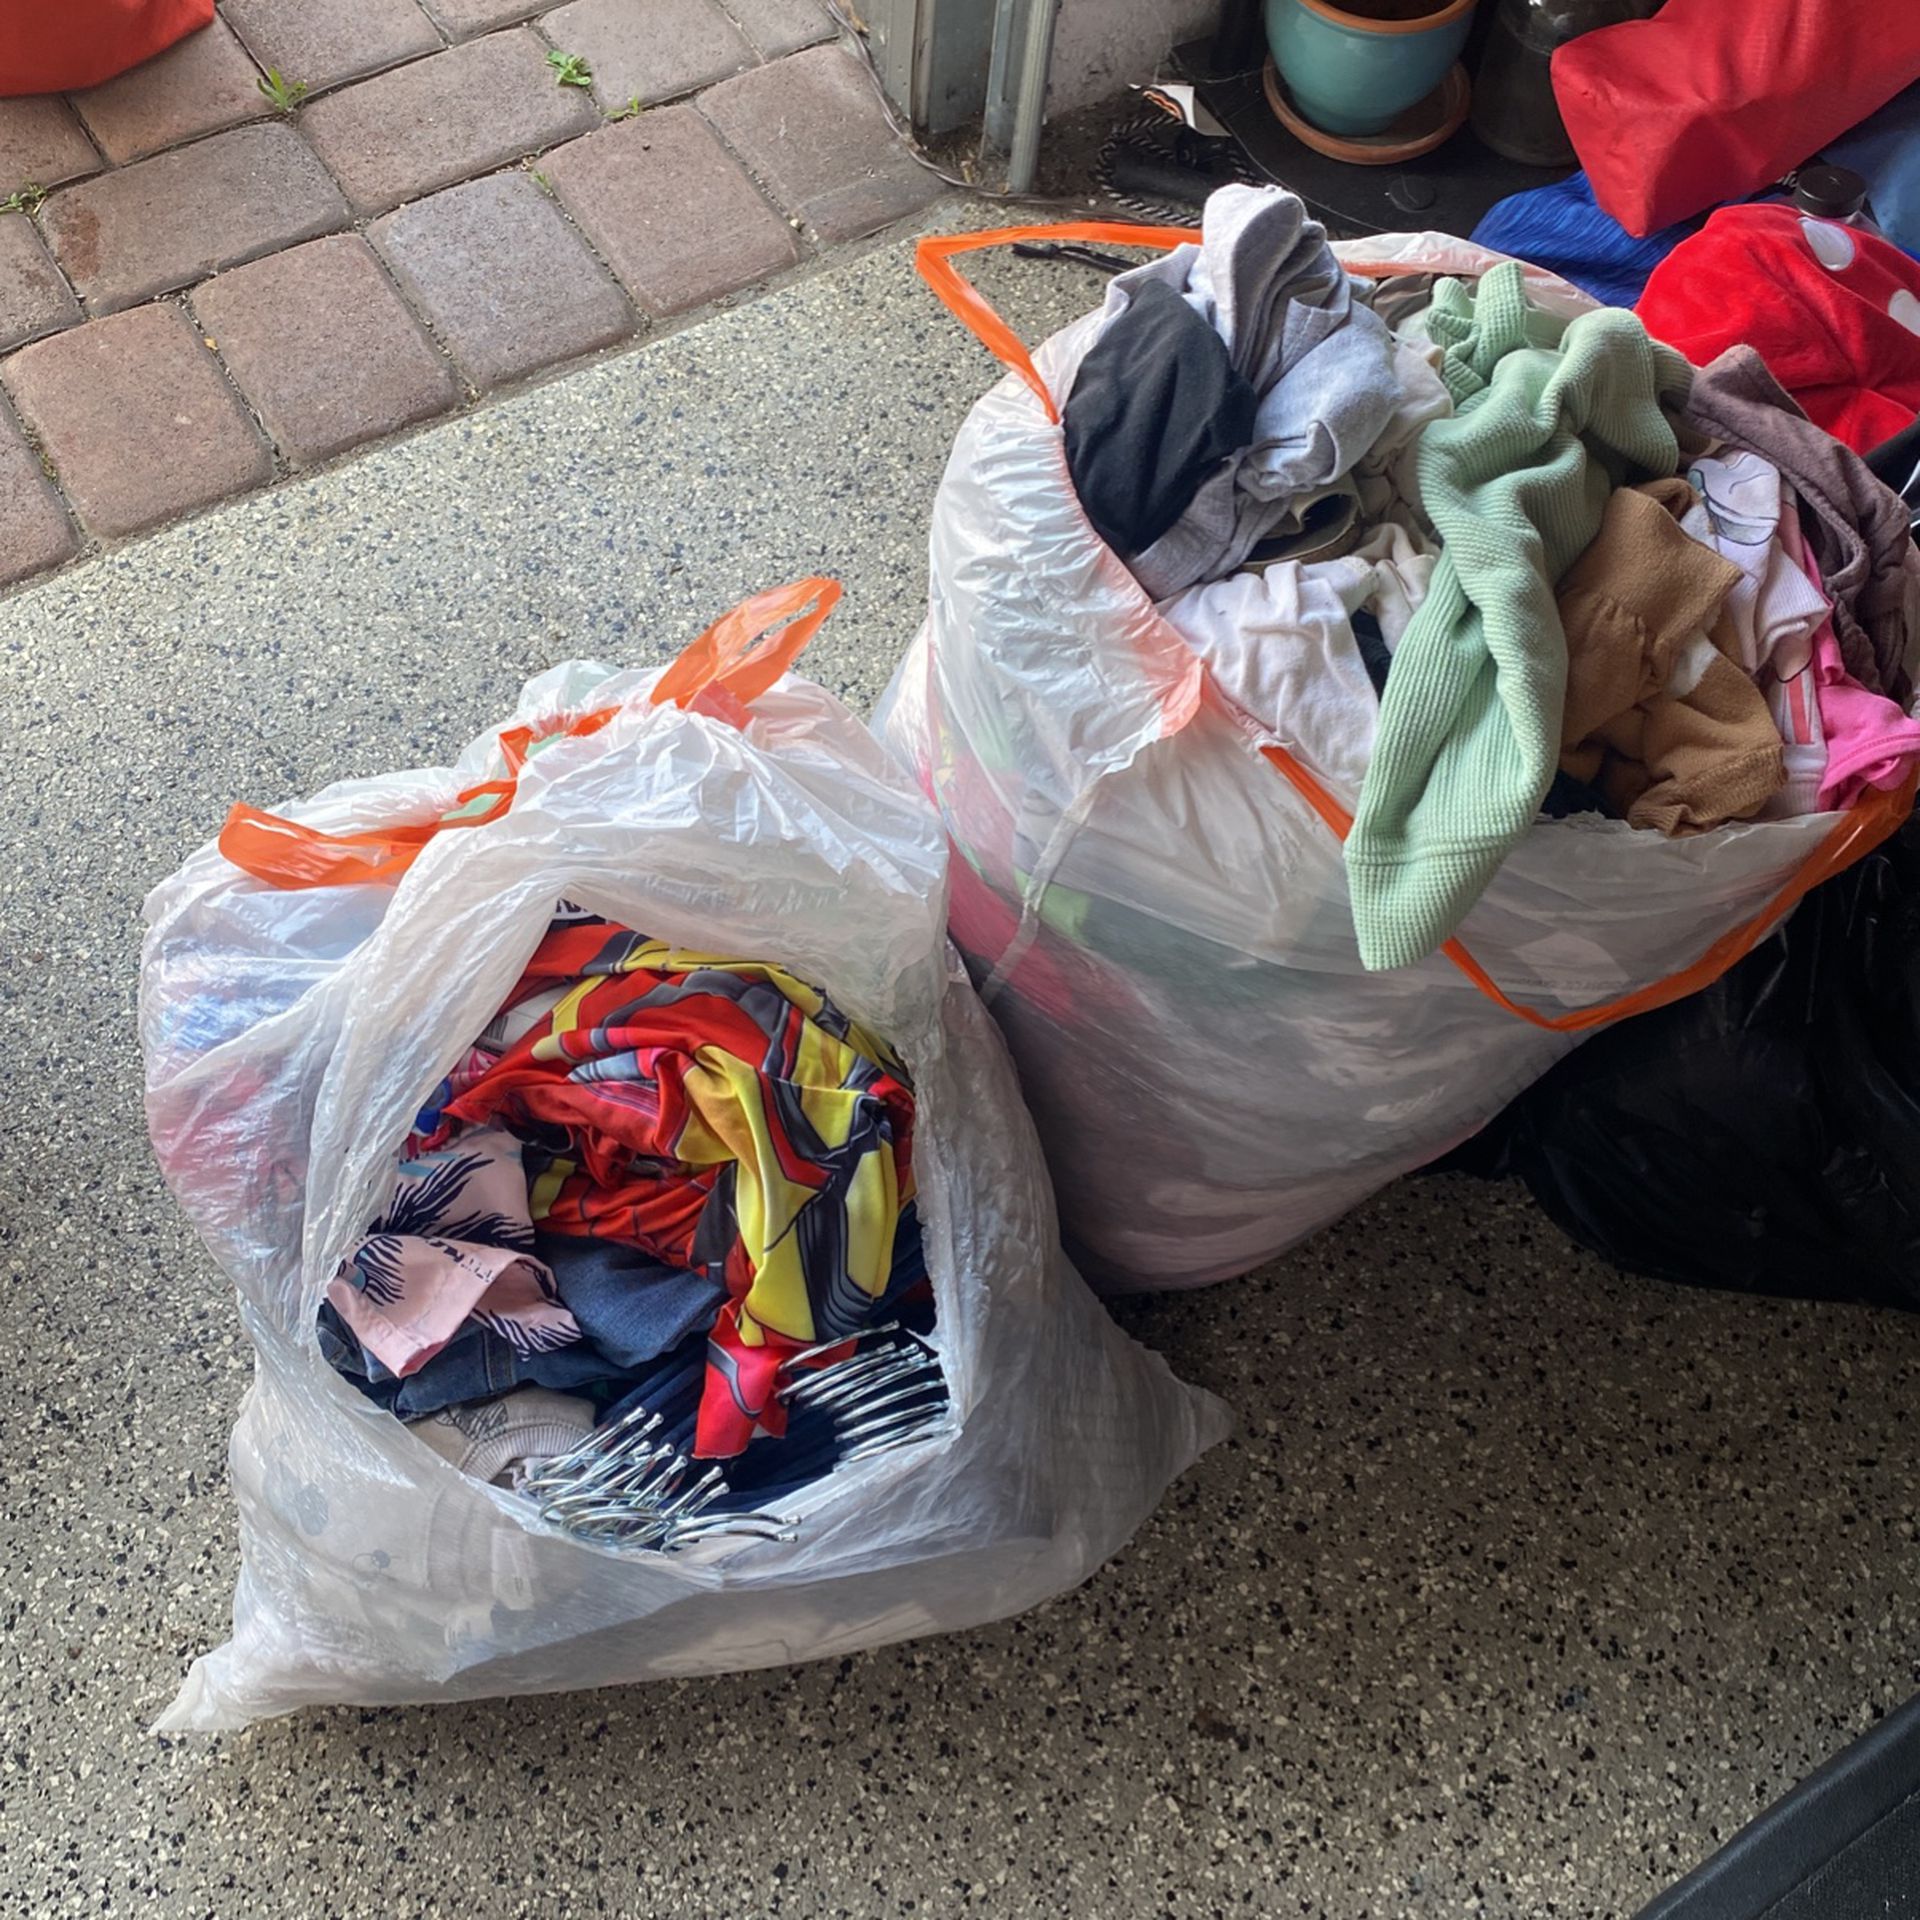 FREE BOYS/GIRLS CLOTHES & HANGERS